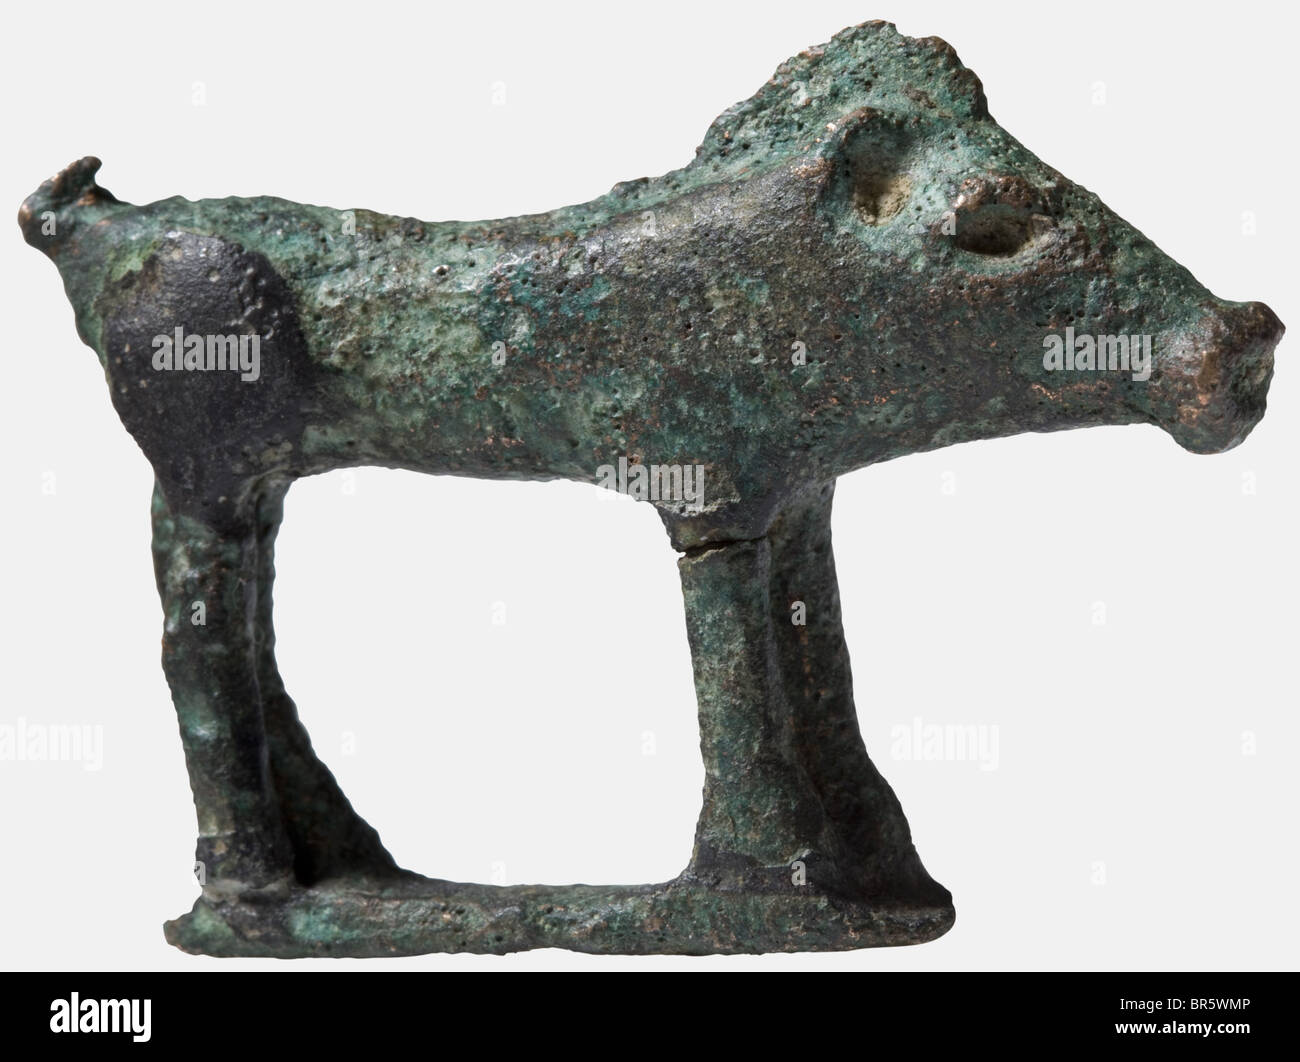 A pair of Celtic bronze boars, 3rd - 1st century B.C. Cast bronze complemented by cold-working. Good naturalistic portrayal, especially the larger boar elaborately crafted. Height 3.2 cm and 3 cm. Both with dark green patina, intact. Cf. Hermann Dannheimer, Das keltische Jahrtausend, State Prehistoric Collection Munich, 1993, fig. 124 and 435. Provenance: B. Collection, Basel, 1970s. historic, historical, 20th century, ancient world, ancient world, ancient times, object, objects, stills, clipping, cut out, cut-out, cut-outs, sculpture, sculptures, statuette, fi, Stock Photo